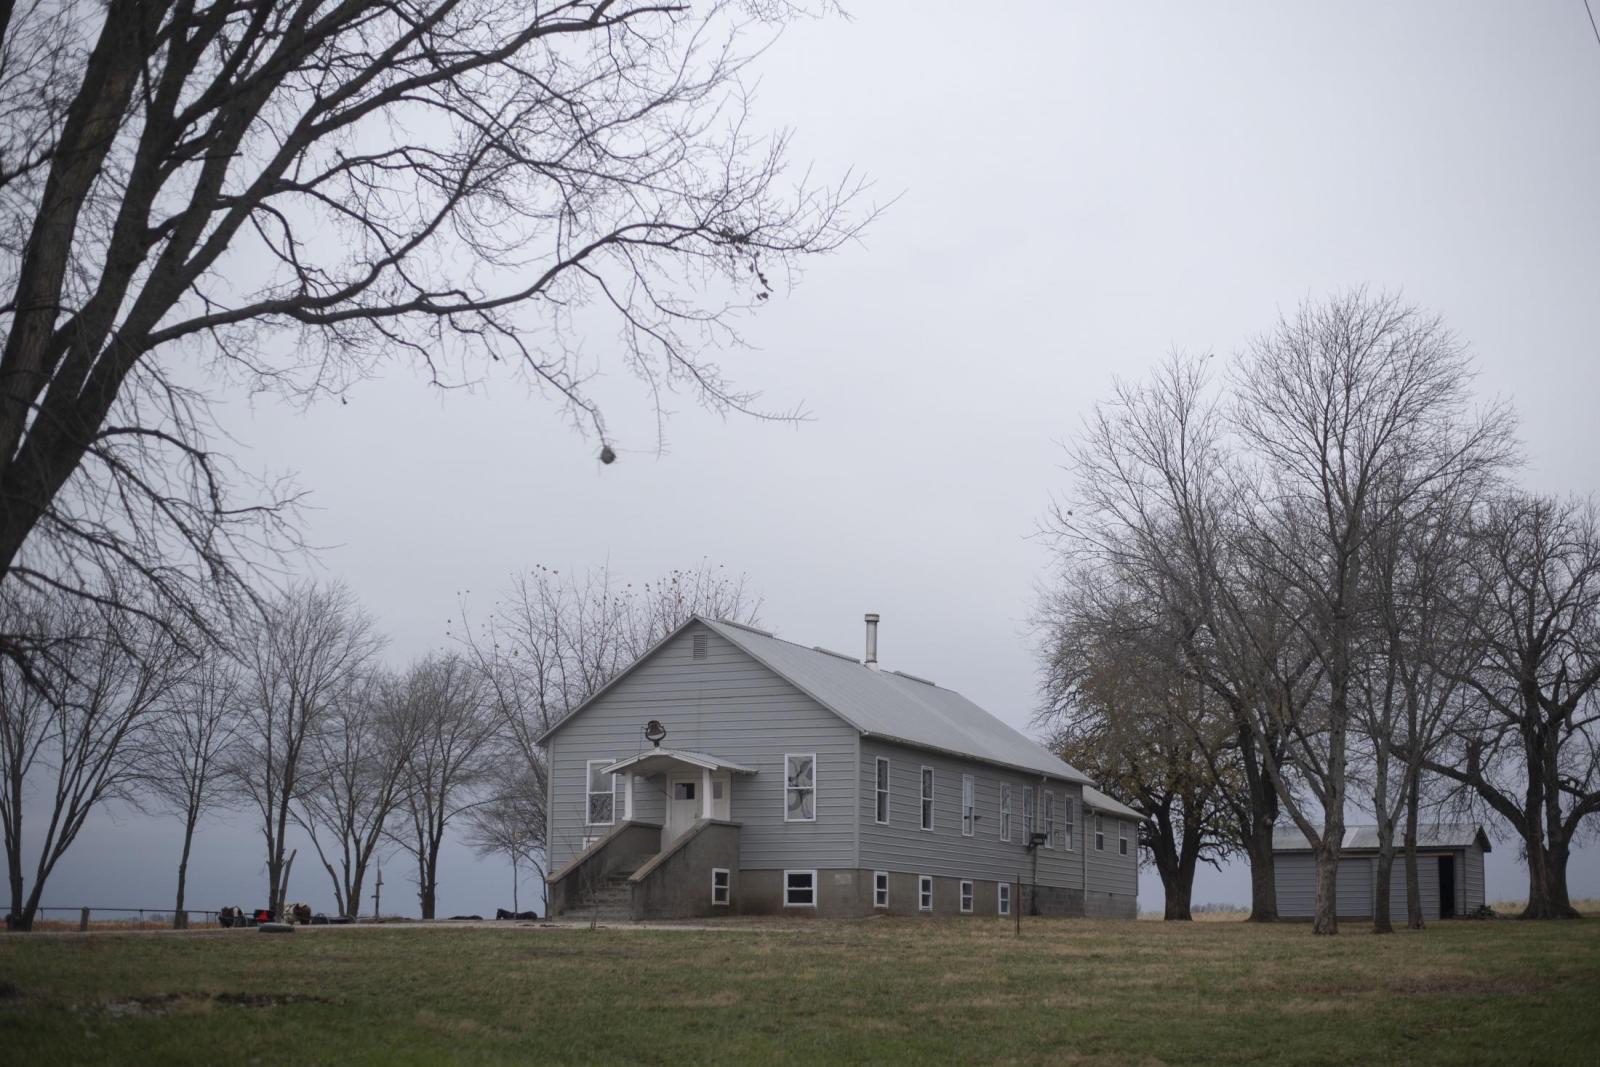 From this earth - A church belonging to a community of Old Order Mennonites stands Nov. 24. The funeral for my...